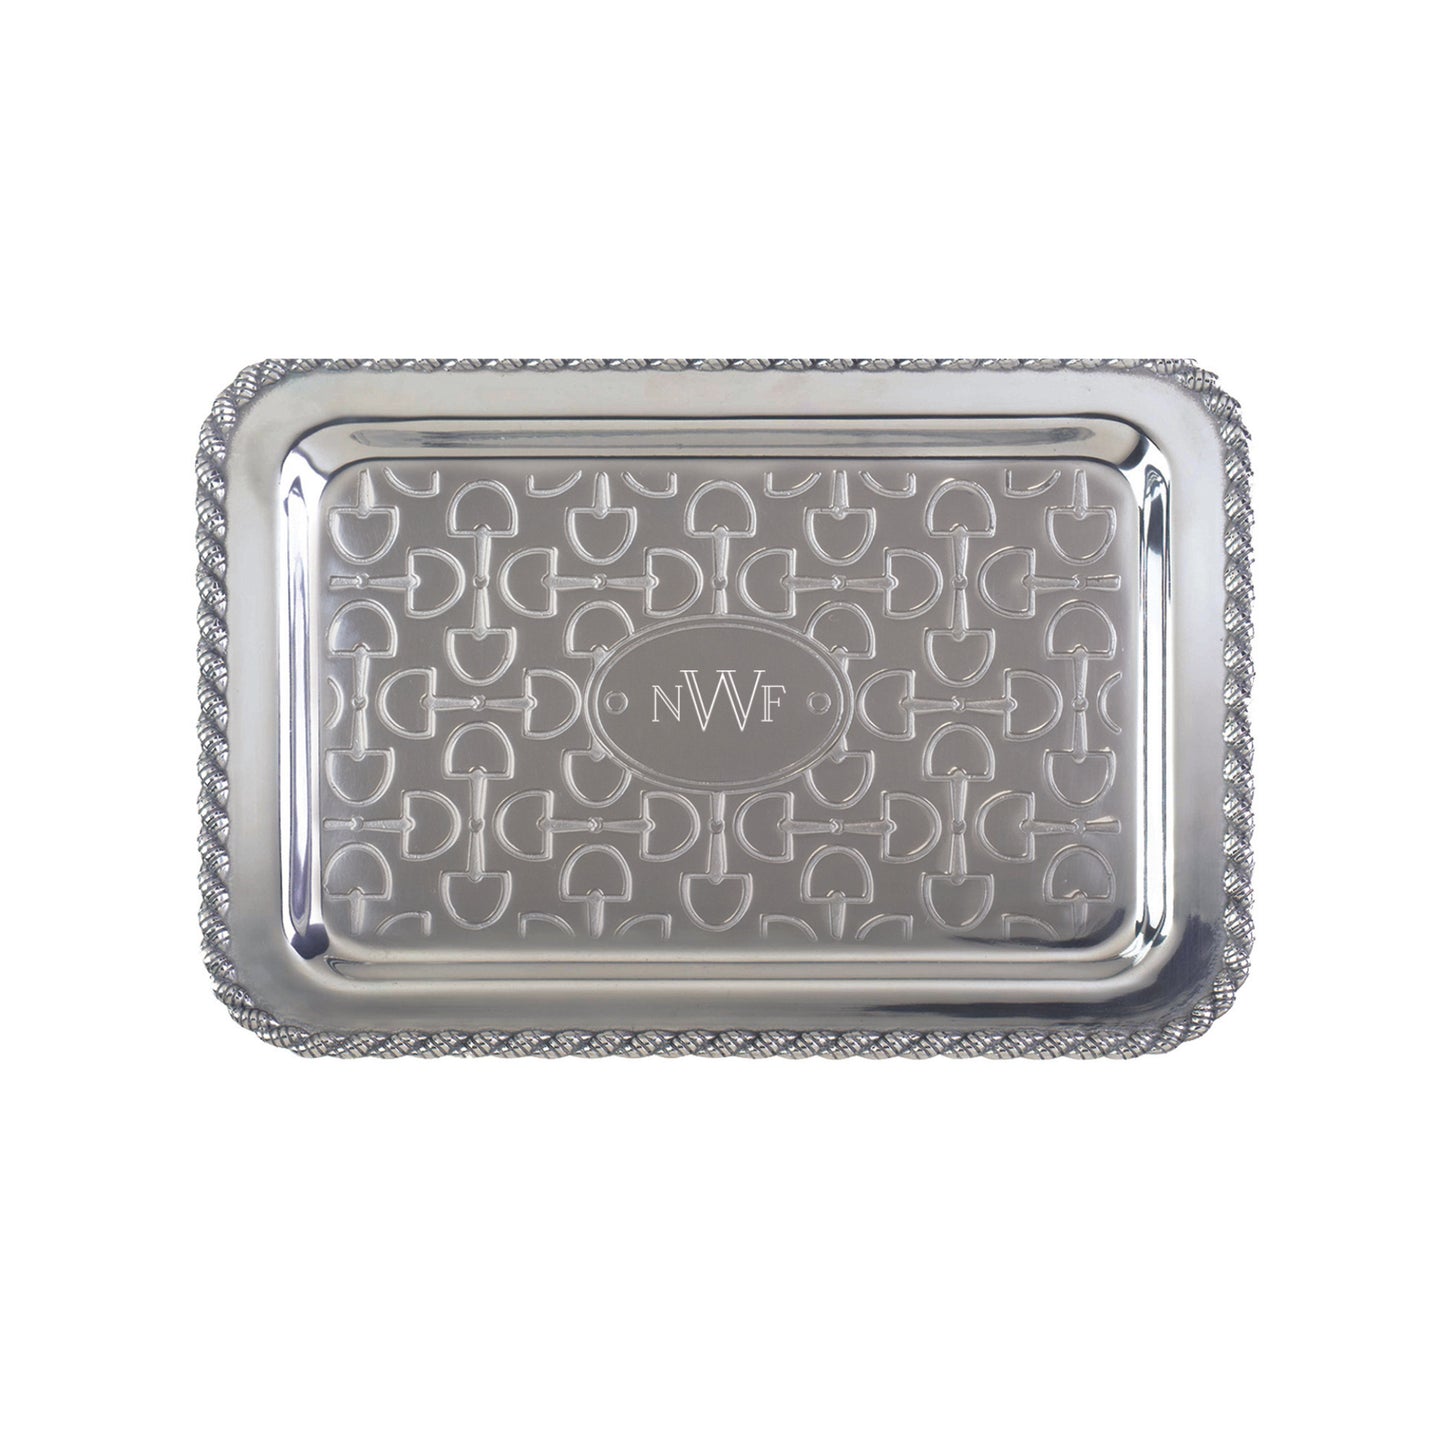 Derby Run Vanity Tray with engraving options. shown here with engraved initials - Templeton Silver